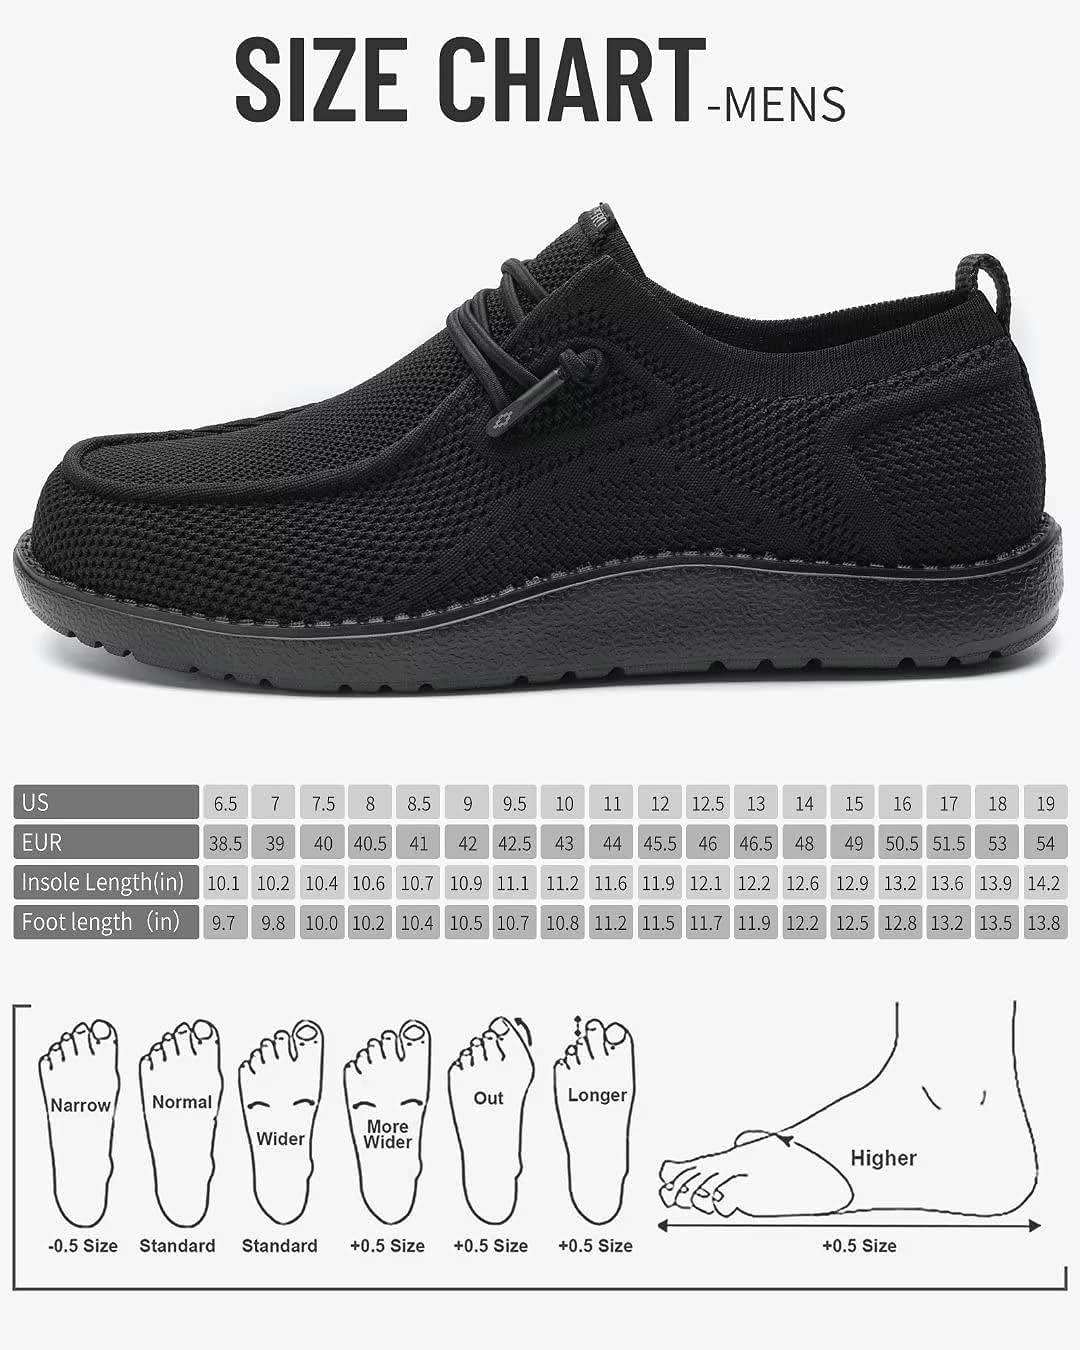 1TAZERO Extra Wide Shoes for Men - Wide Width 4E(5E) Slip on Diabetic Max  Shoes with Arch Support Plantar Fasciitis Loafers Casual for Swollen Feet  Black 11 X-Wide